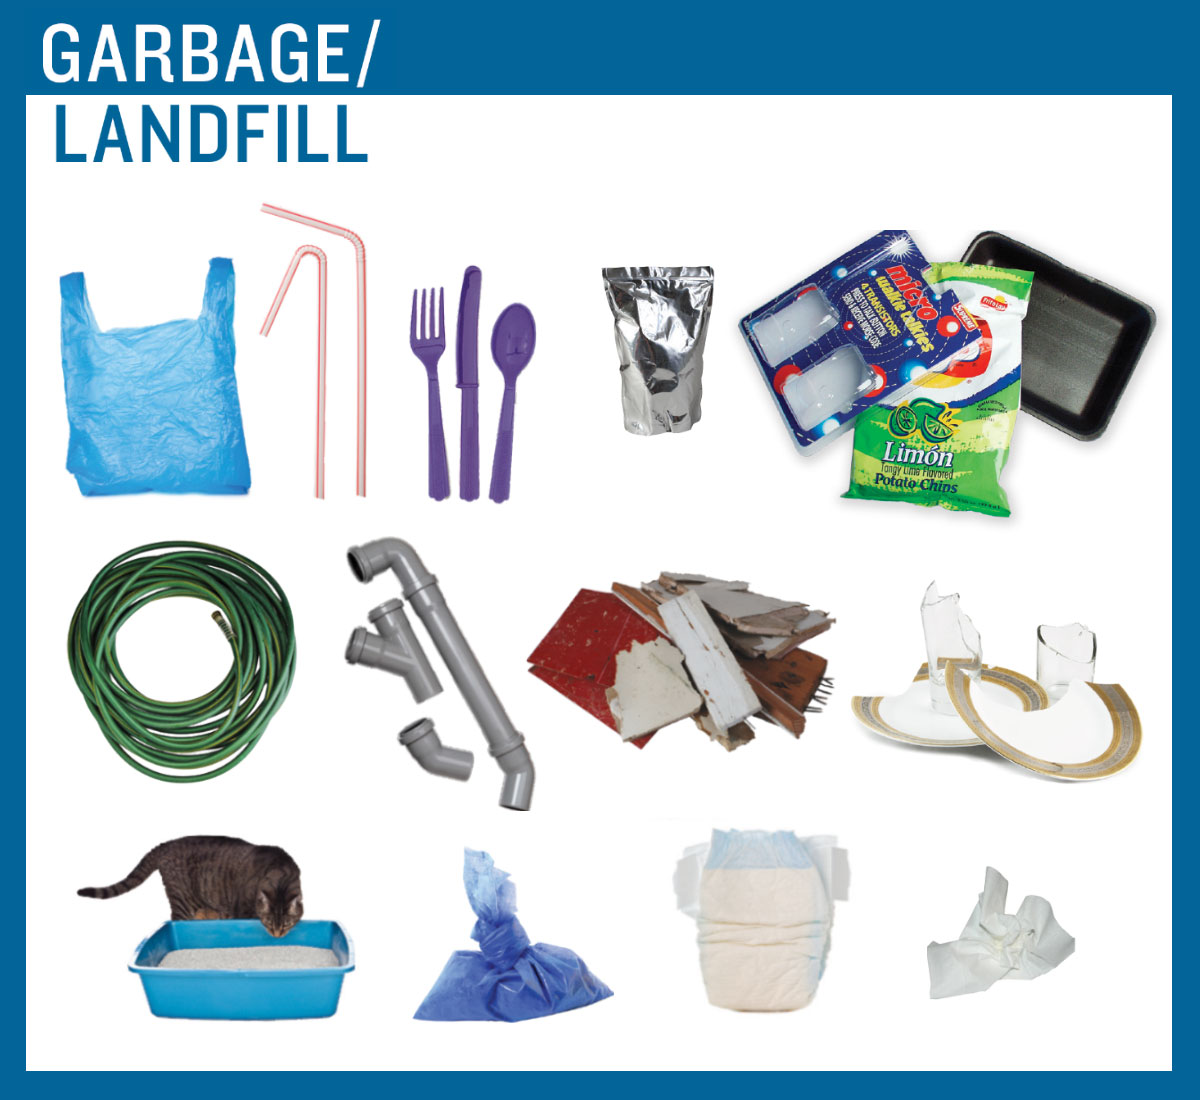 WHAT GOES IN GARBAGE